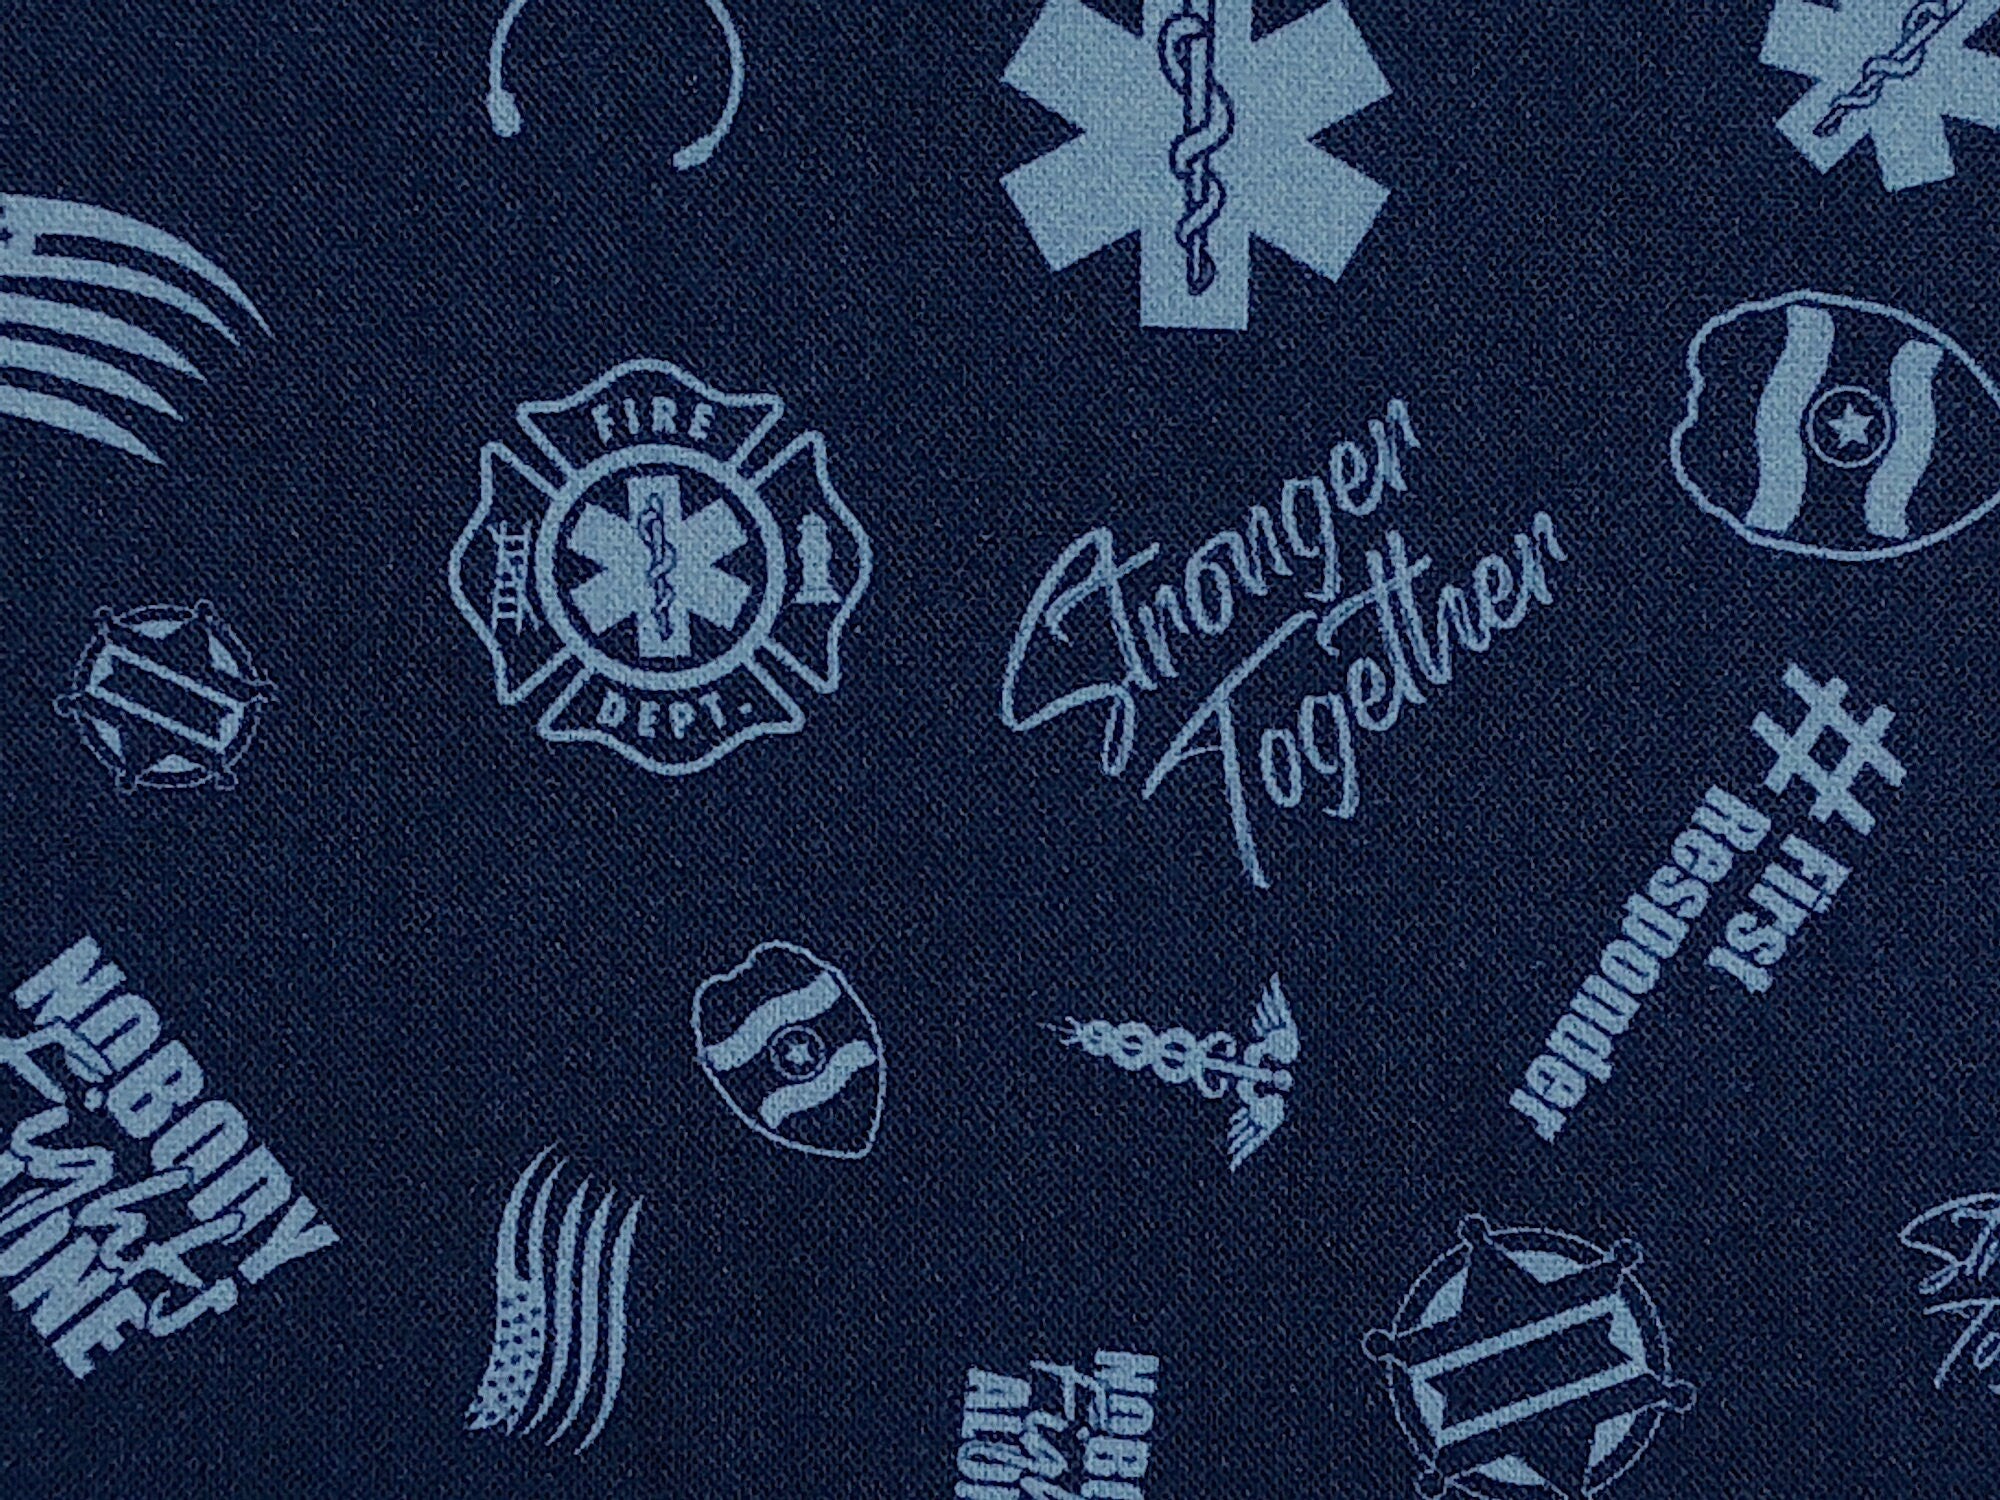 Blue cotton fabric covered with first responder insignias'.